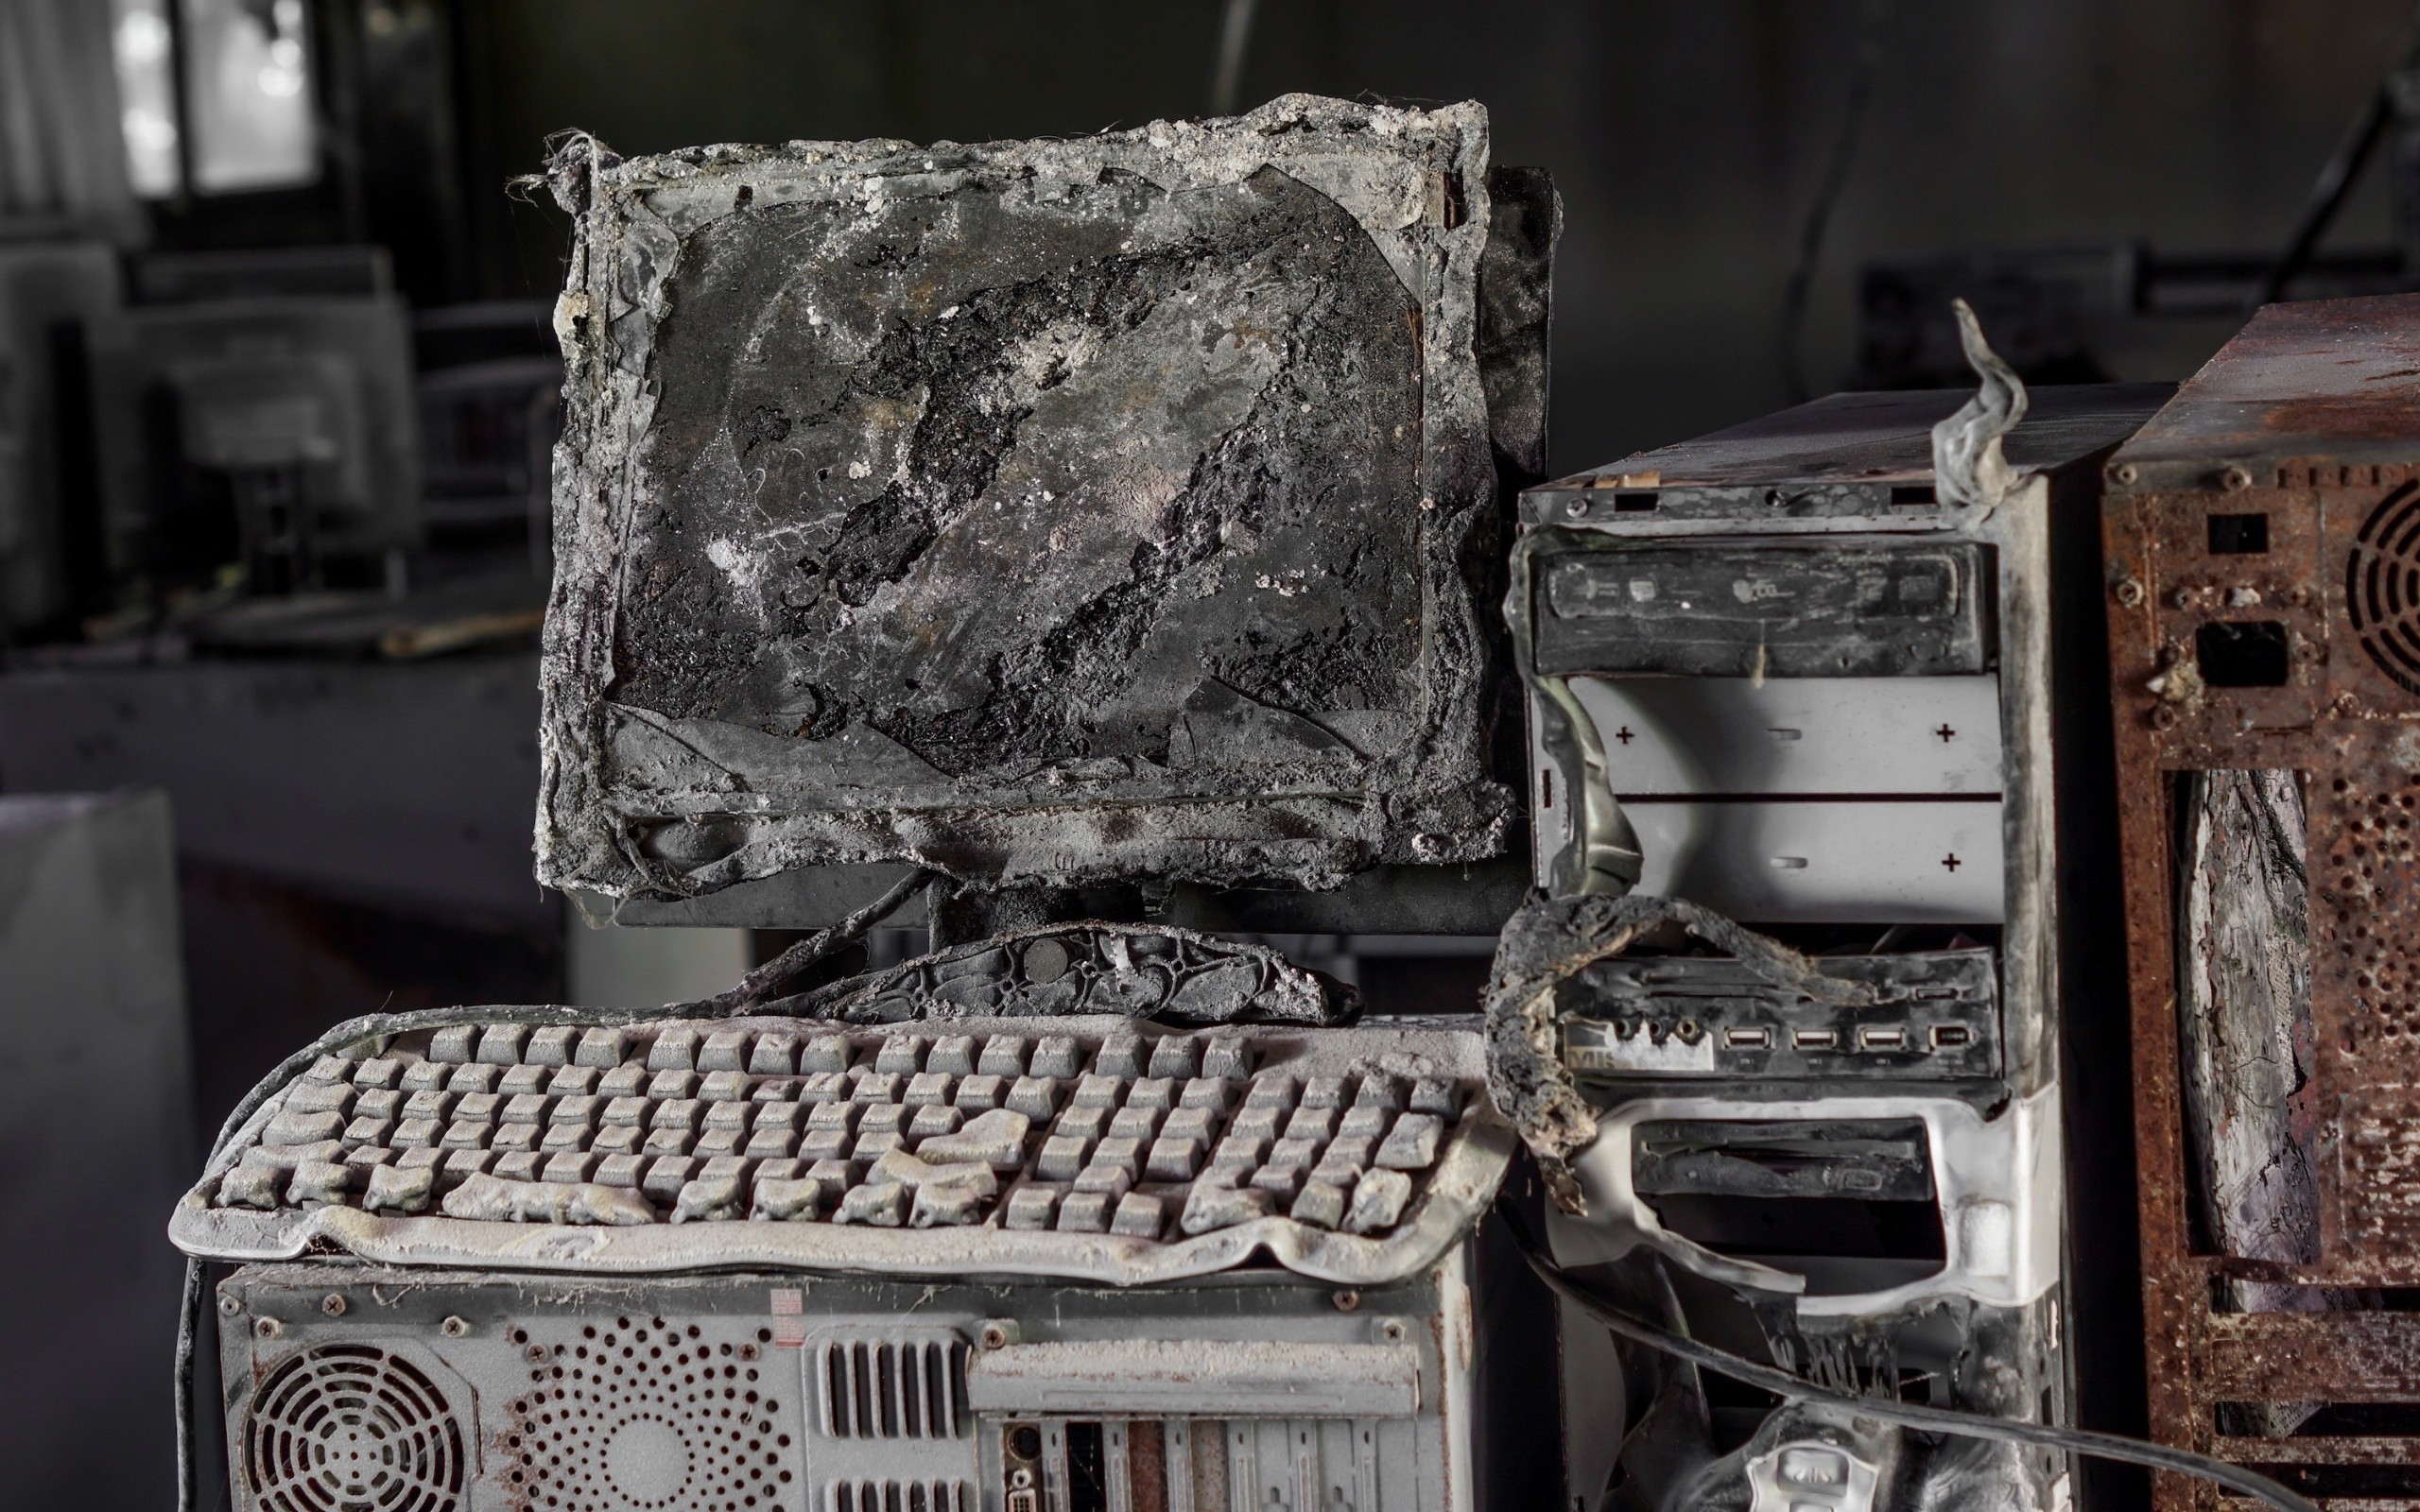 Computer Fire Melted Plastic Rust Depth Of Field Keyboards Destruction 2560x1600